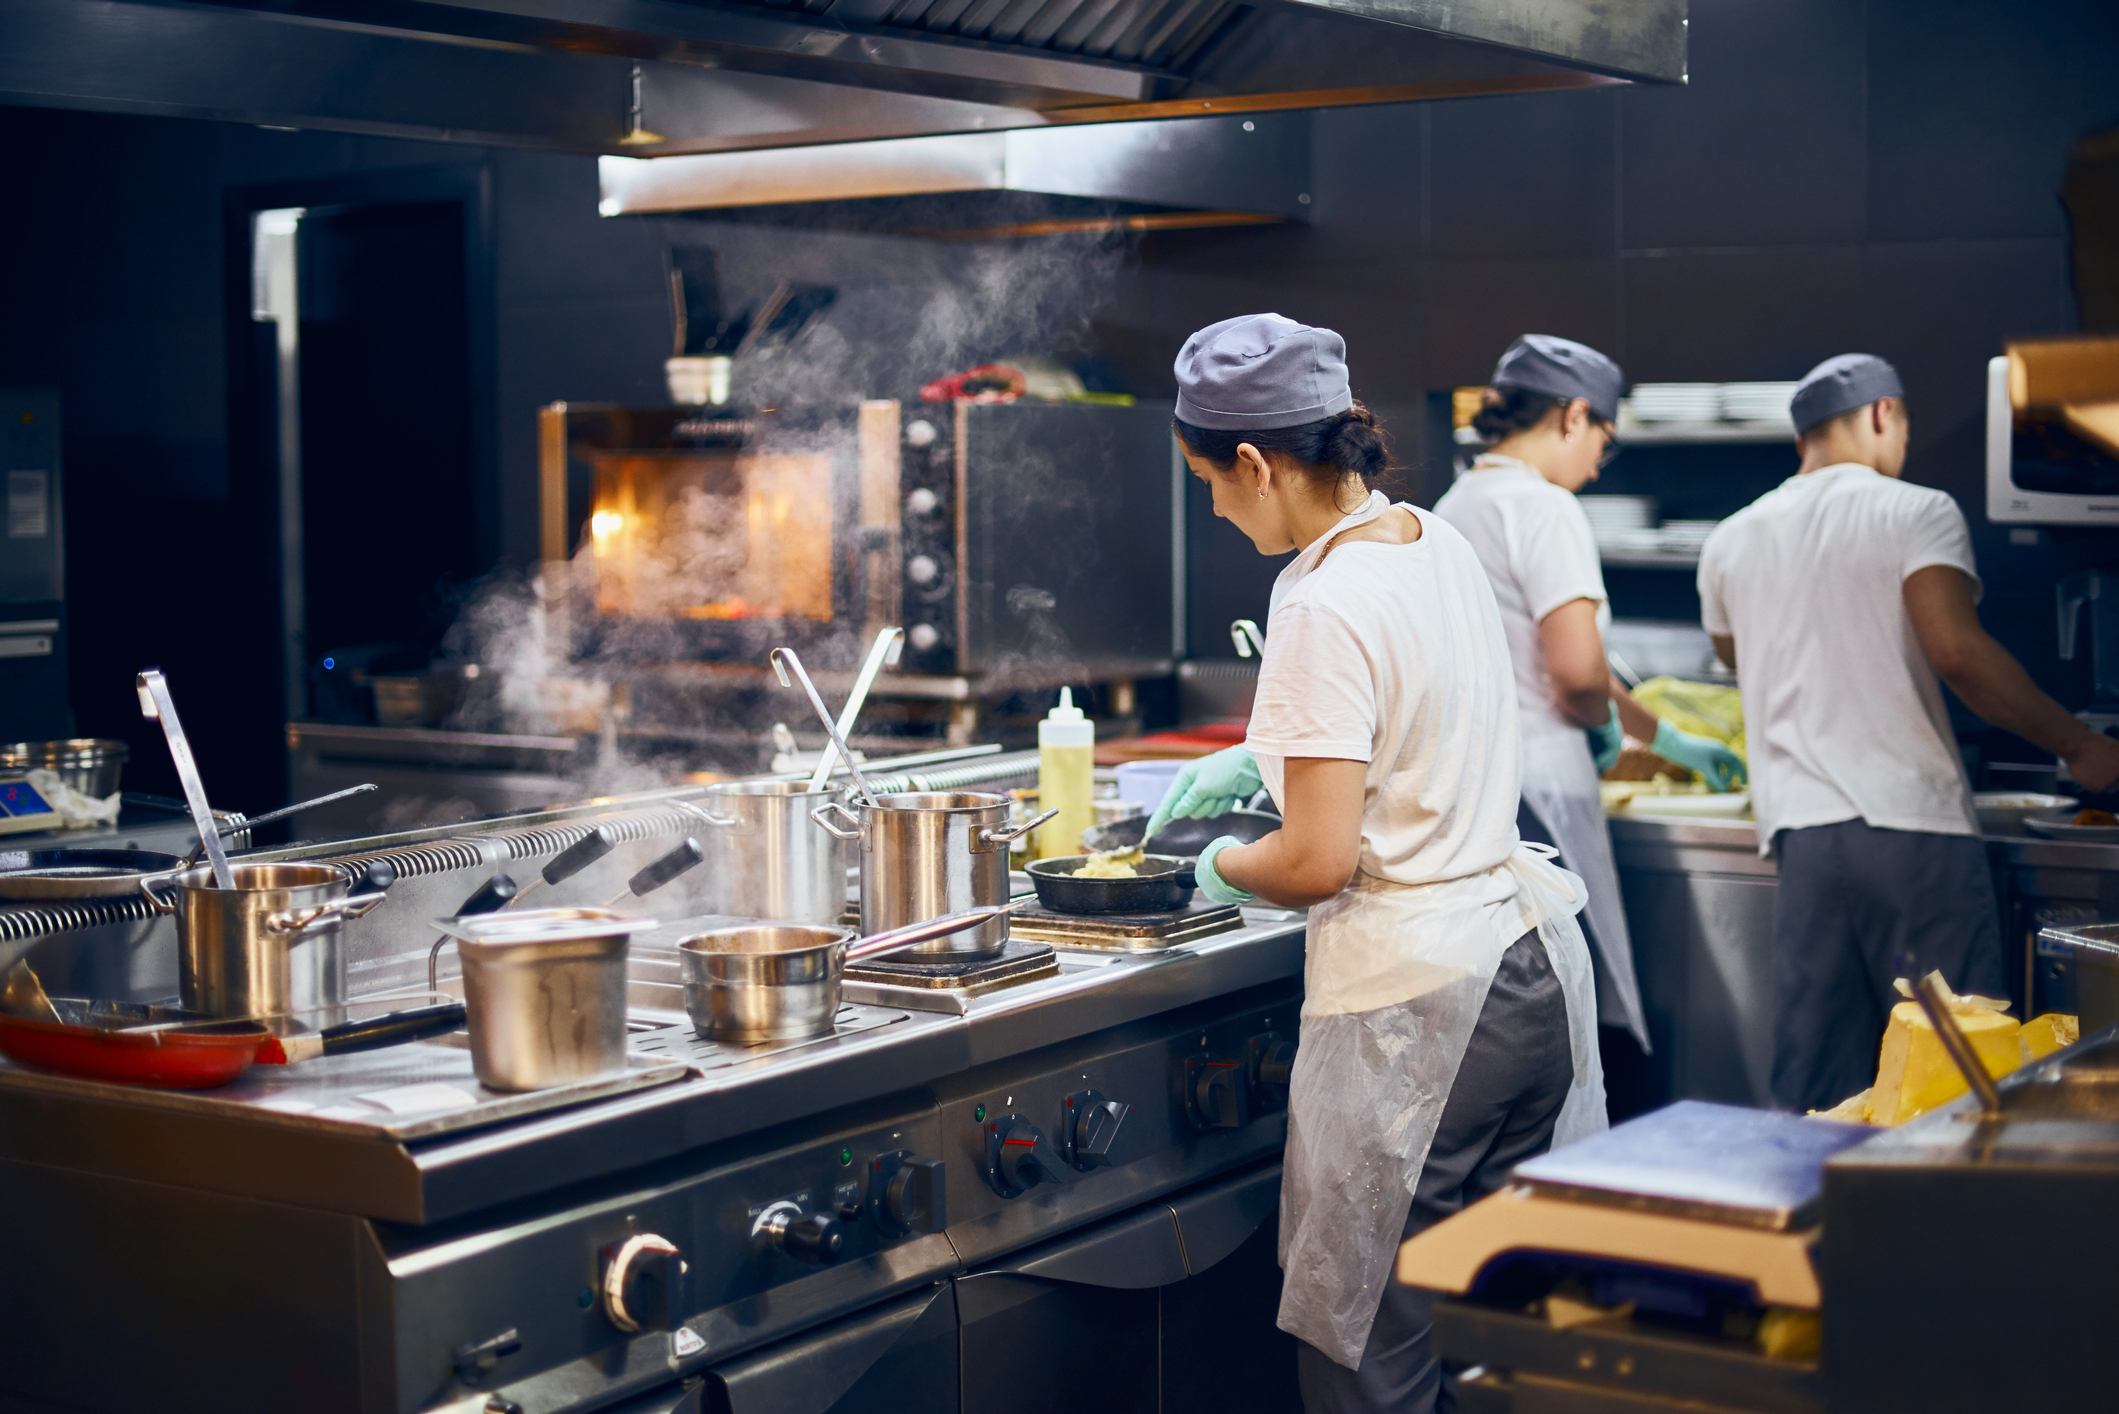 5 Reasons to Upgrade Your Restaurant’s Equipment